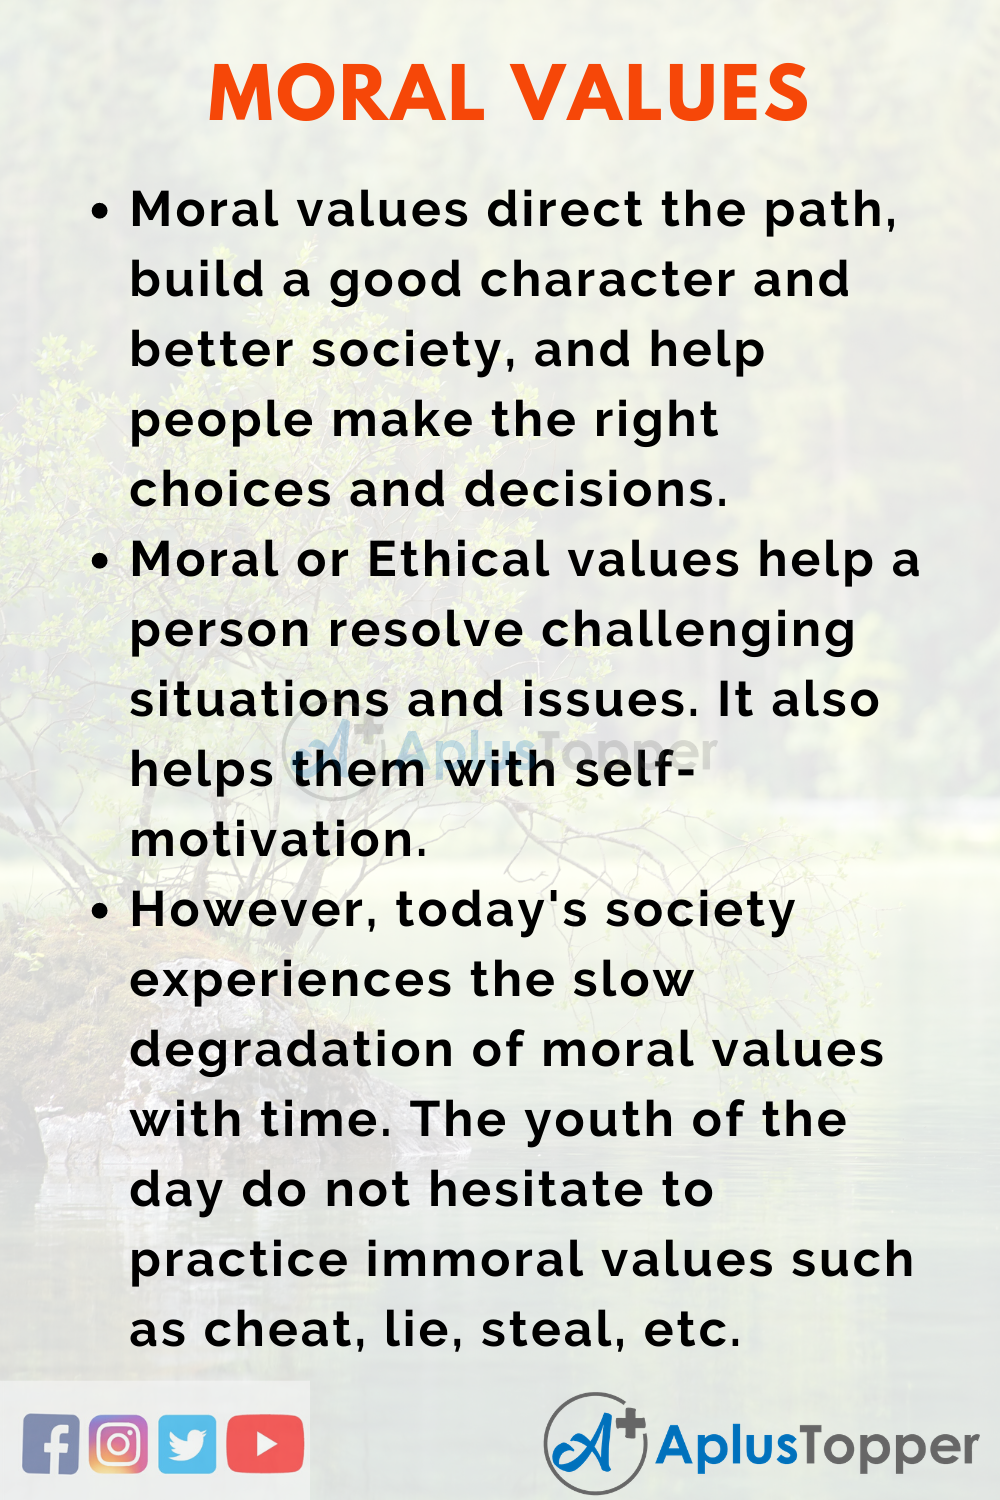 speech on moral values for students